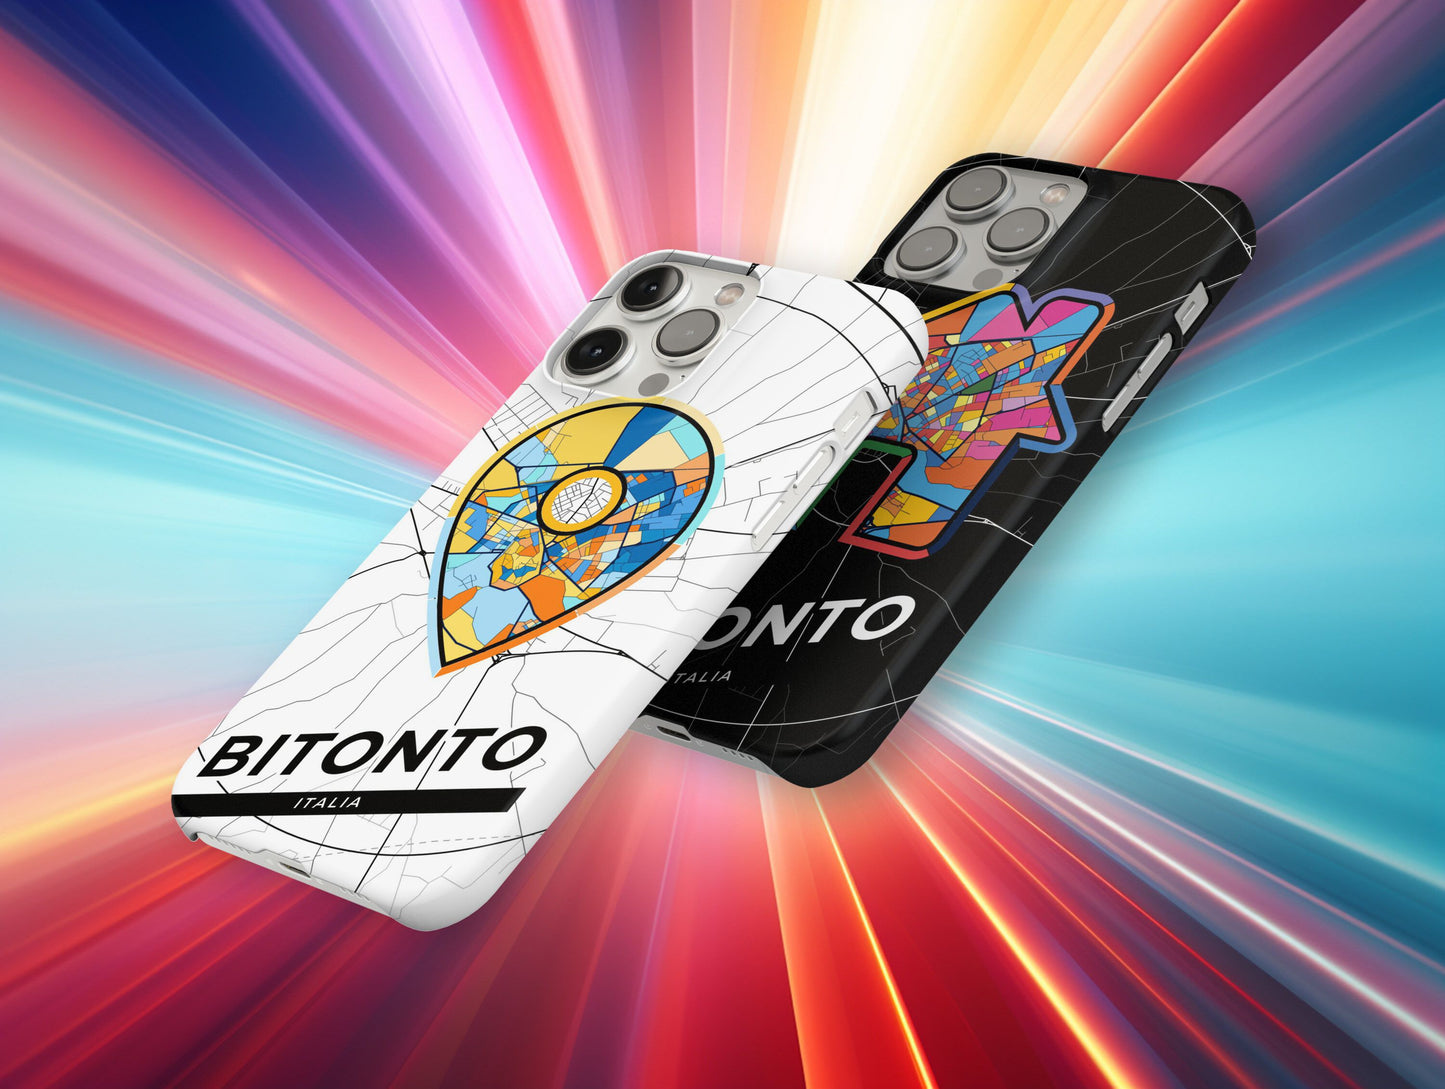 Bitonto Italy slim phone case with colorful icon. Birthday, wedding or housewarming gift. Couple match cases.